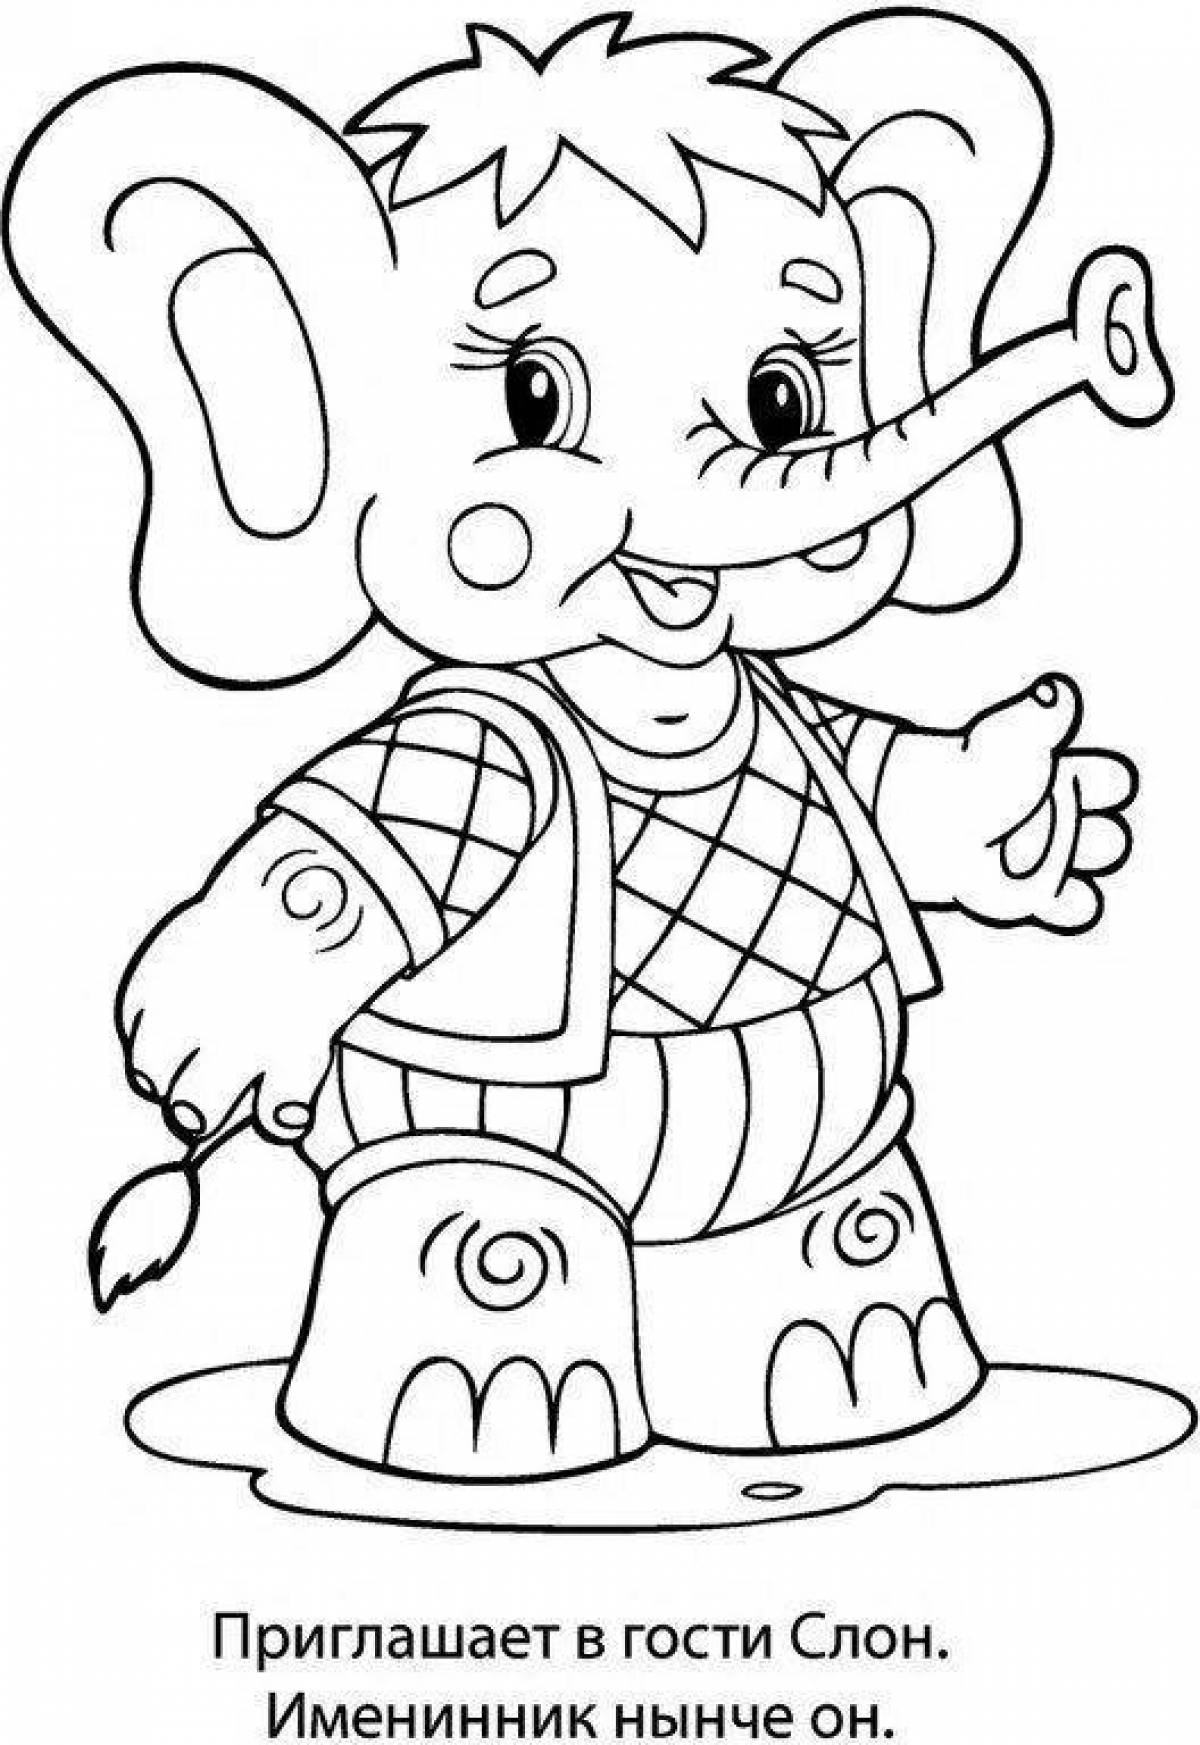 Colorful pink elephant coloring page